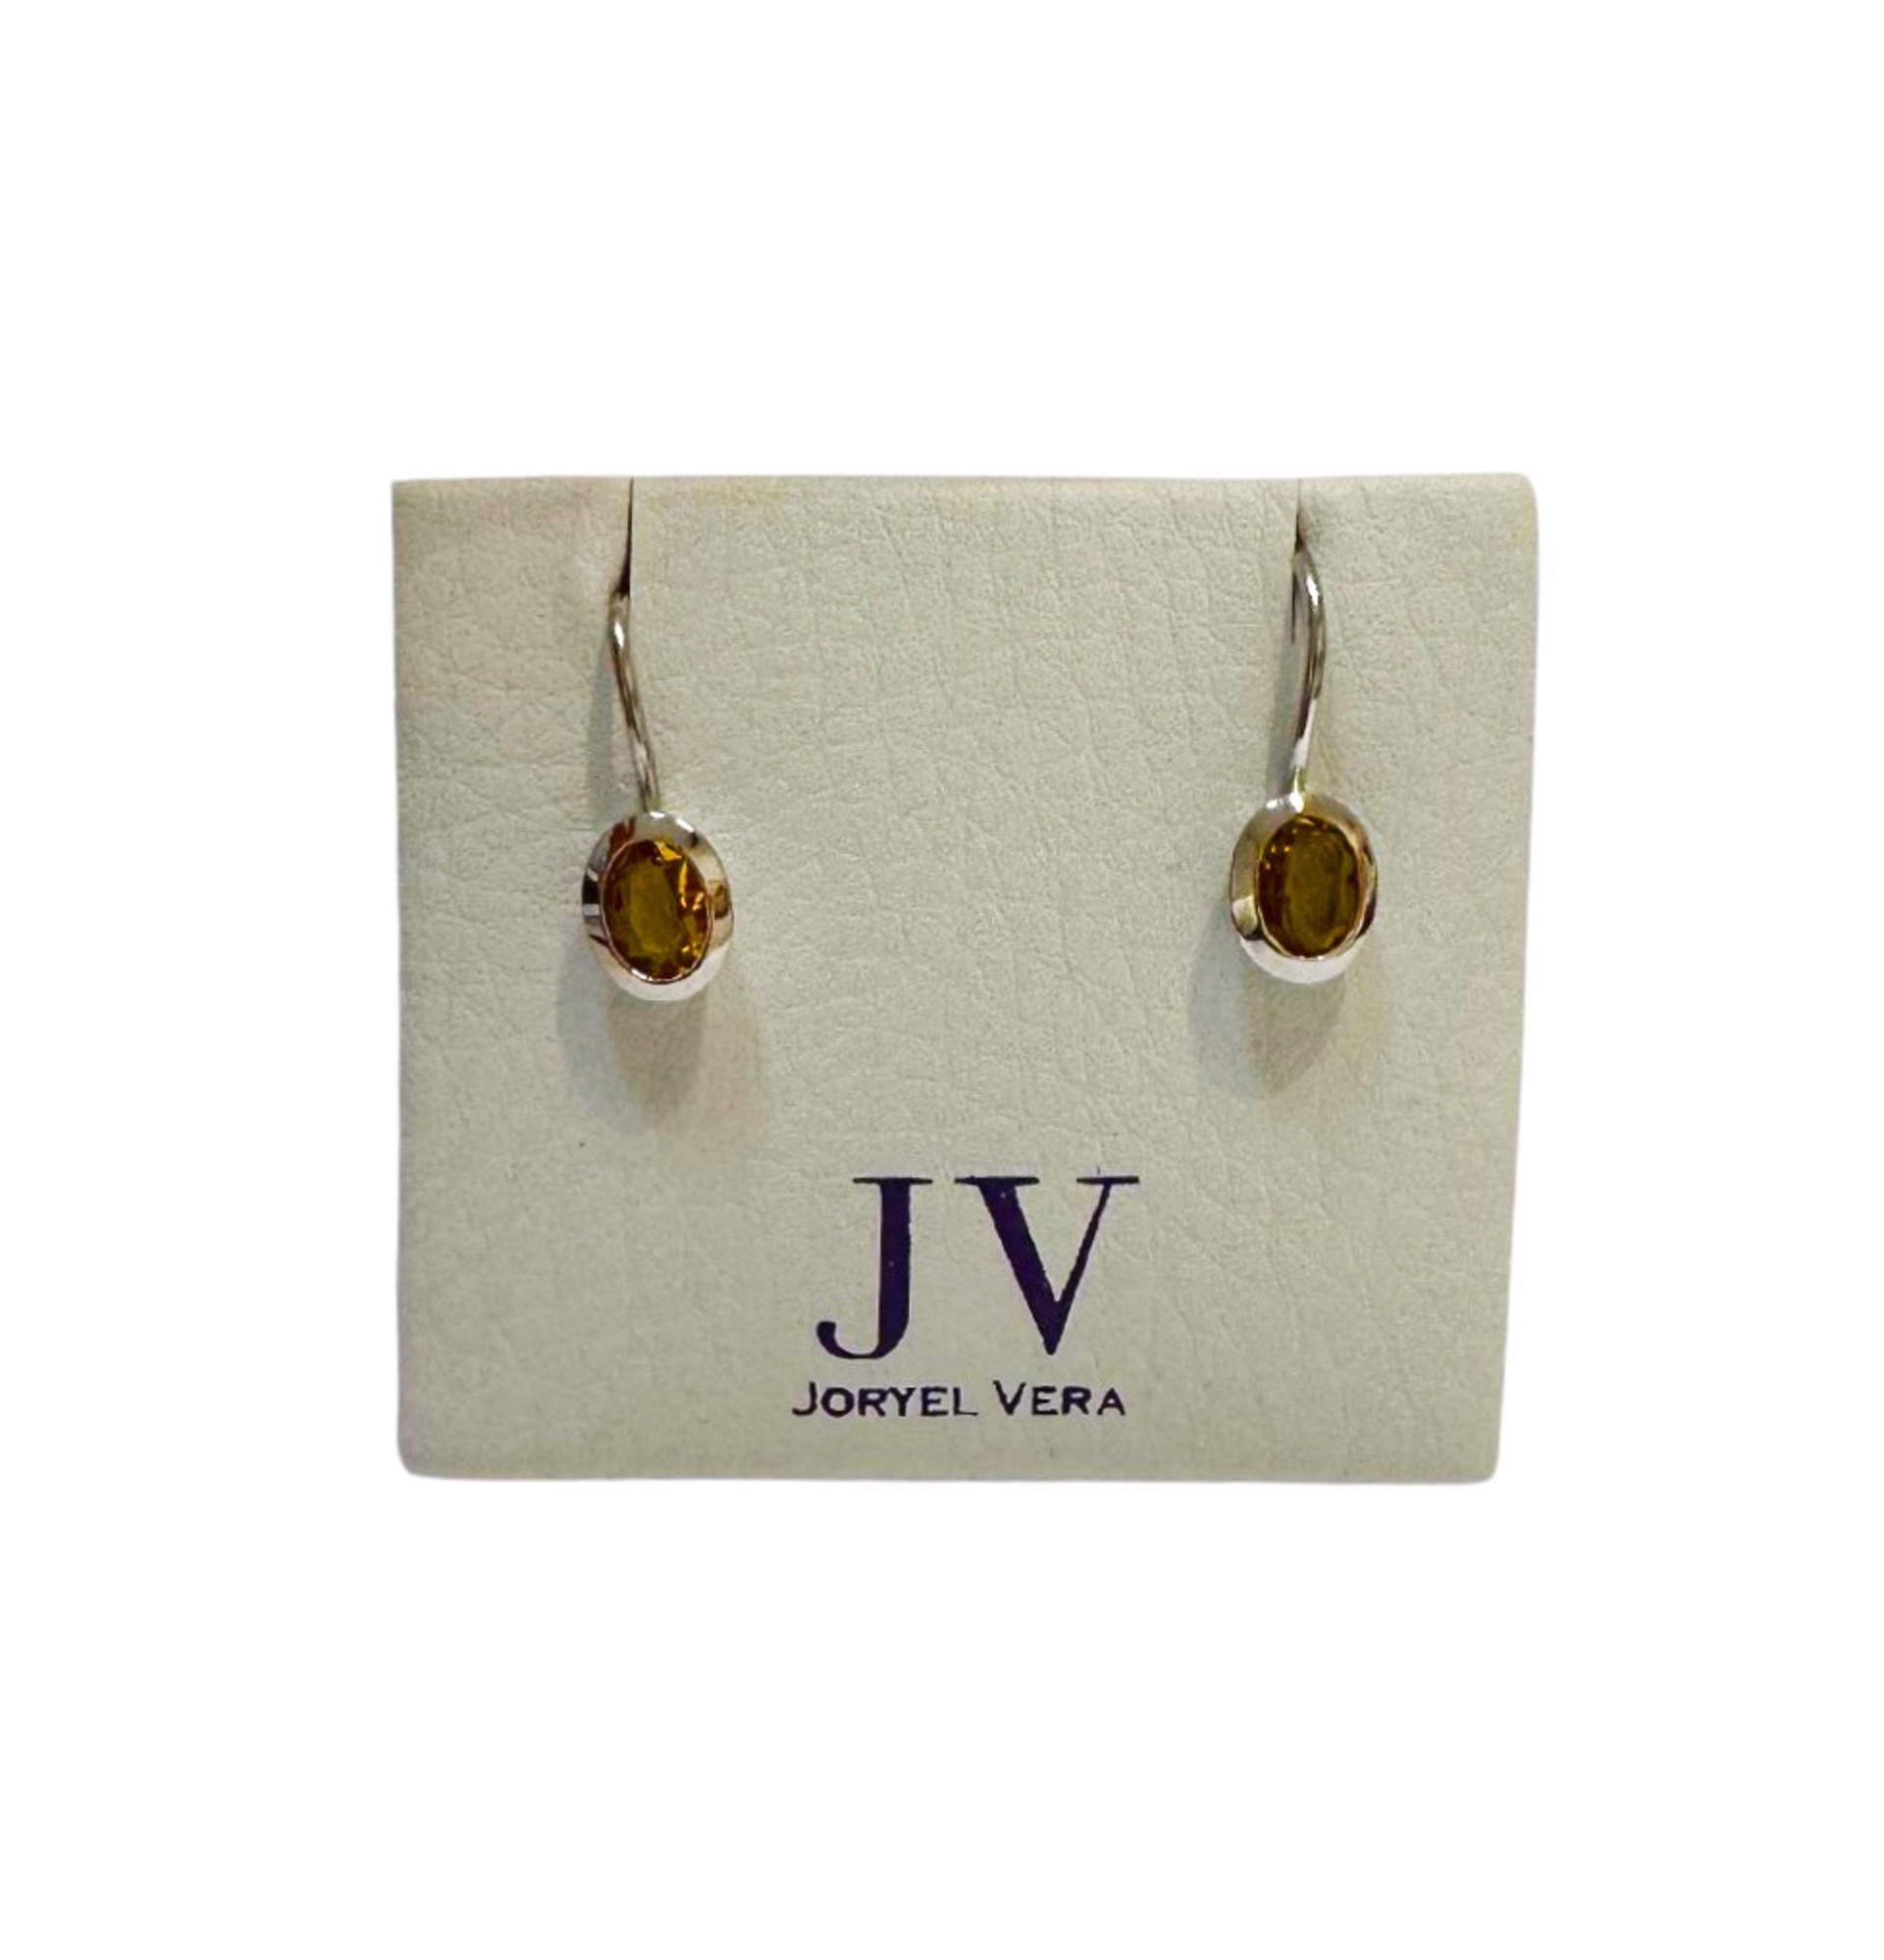 Earrings - Bezel Set Sterling Silver with Oval Citrine on Earwires by Joryel Vera